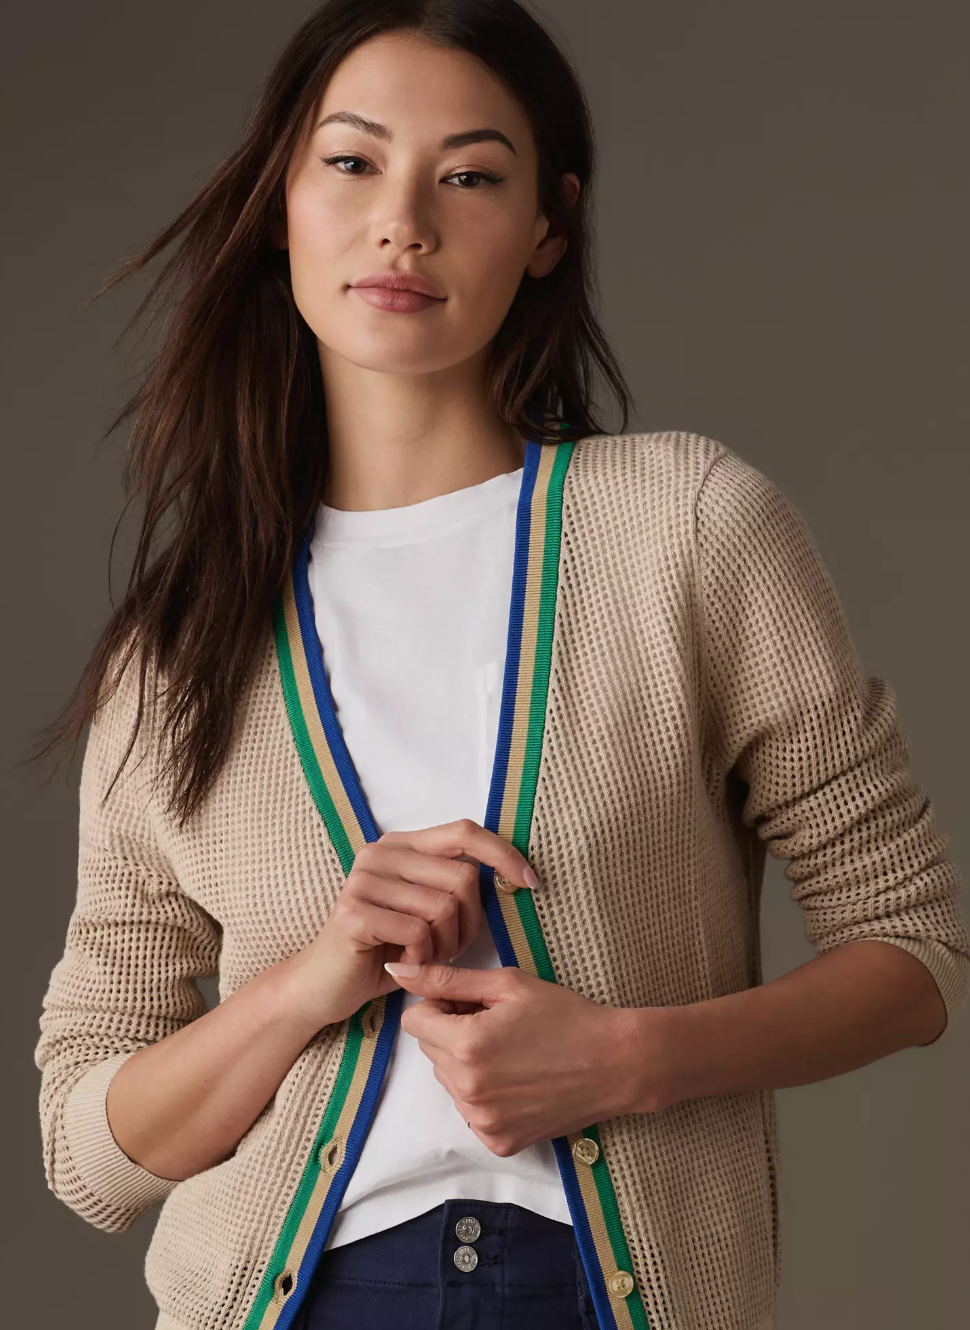 A woman with long dark hair wearing a Kule Zoey Cardigan with green and blue trim, layered over a white t-shirt, posing against a grey background in Scottsdale, Arizona.